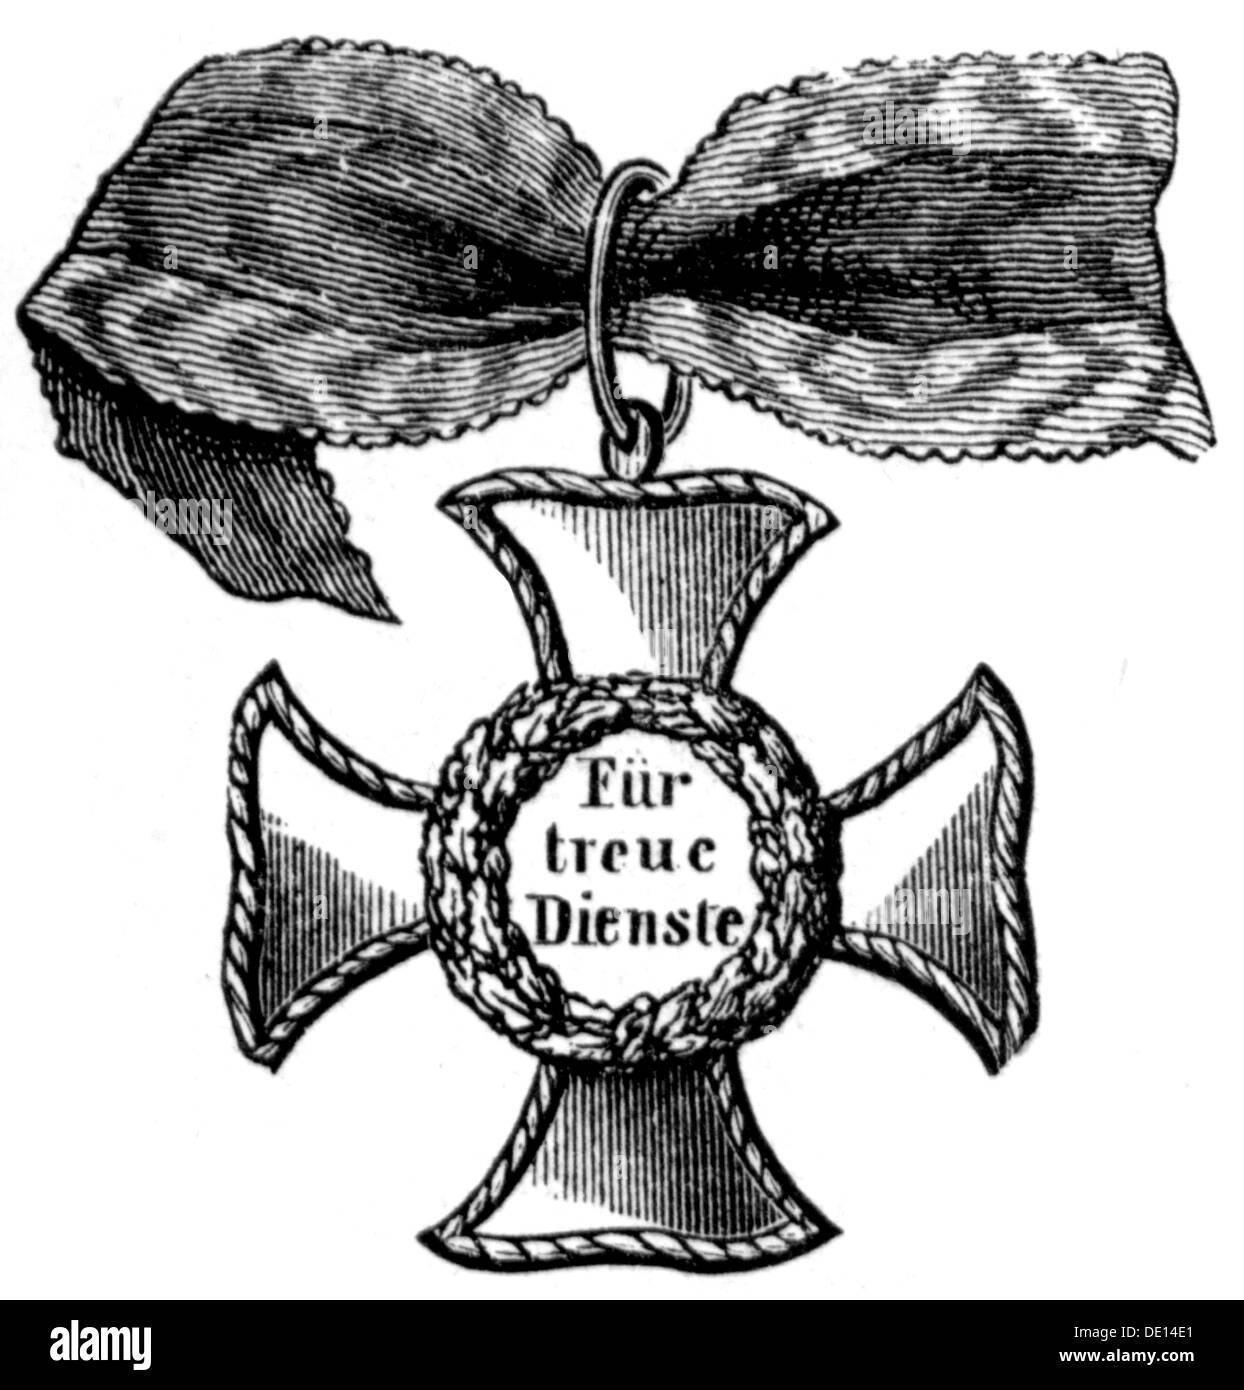 decorations, Germany, Reuss (Younger line), Cross of Honor, founded 20.10.1857 by Prince Henry LXVII of Reuss, badge, wood engraving, 2nd half 19th century, civil cross of honor, civil order, Order of Merit, ribbon, ribbons, Principality Reuss, medal, decoration, medals, decorations, line, lines, honor cross, honour cross, honor crosses, honour crosses, historic, historical, Additional-Rights-Clearences-Not Available Stock Photo